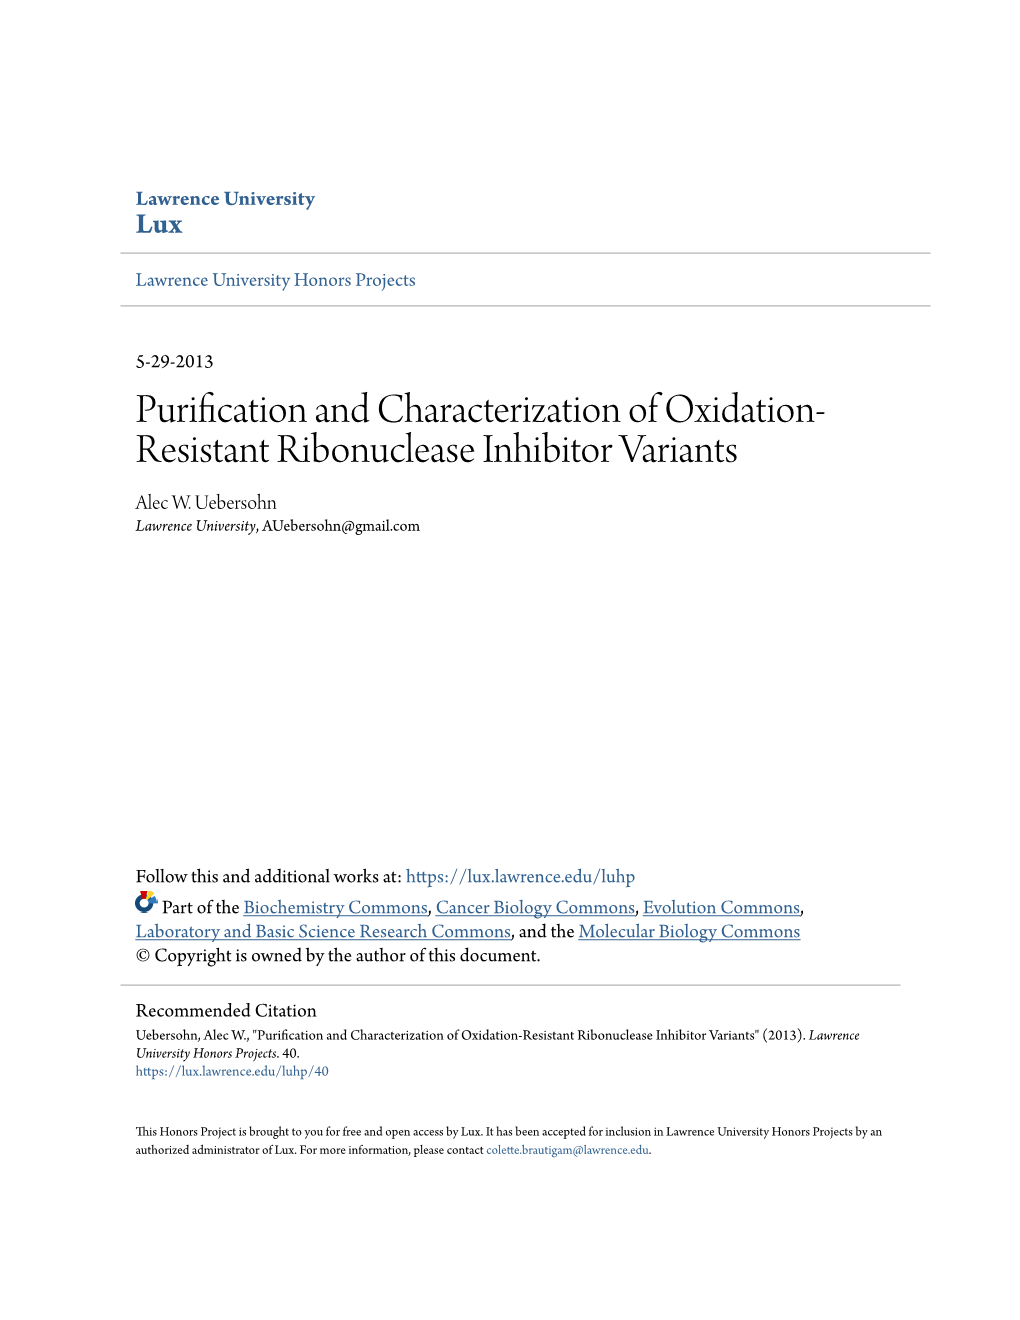 Purification and Characterization of Oxidation-Resistant Ribonuclease Inhibitor Variants" (2013)